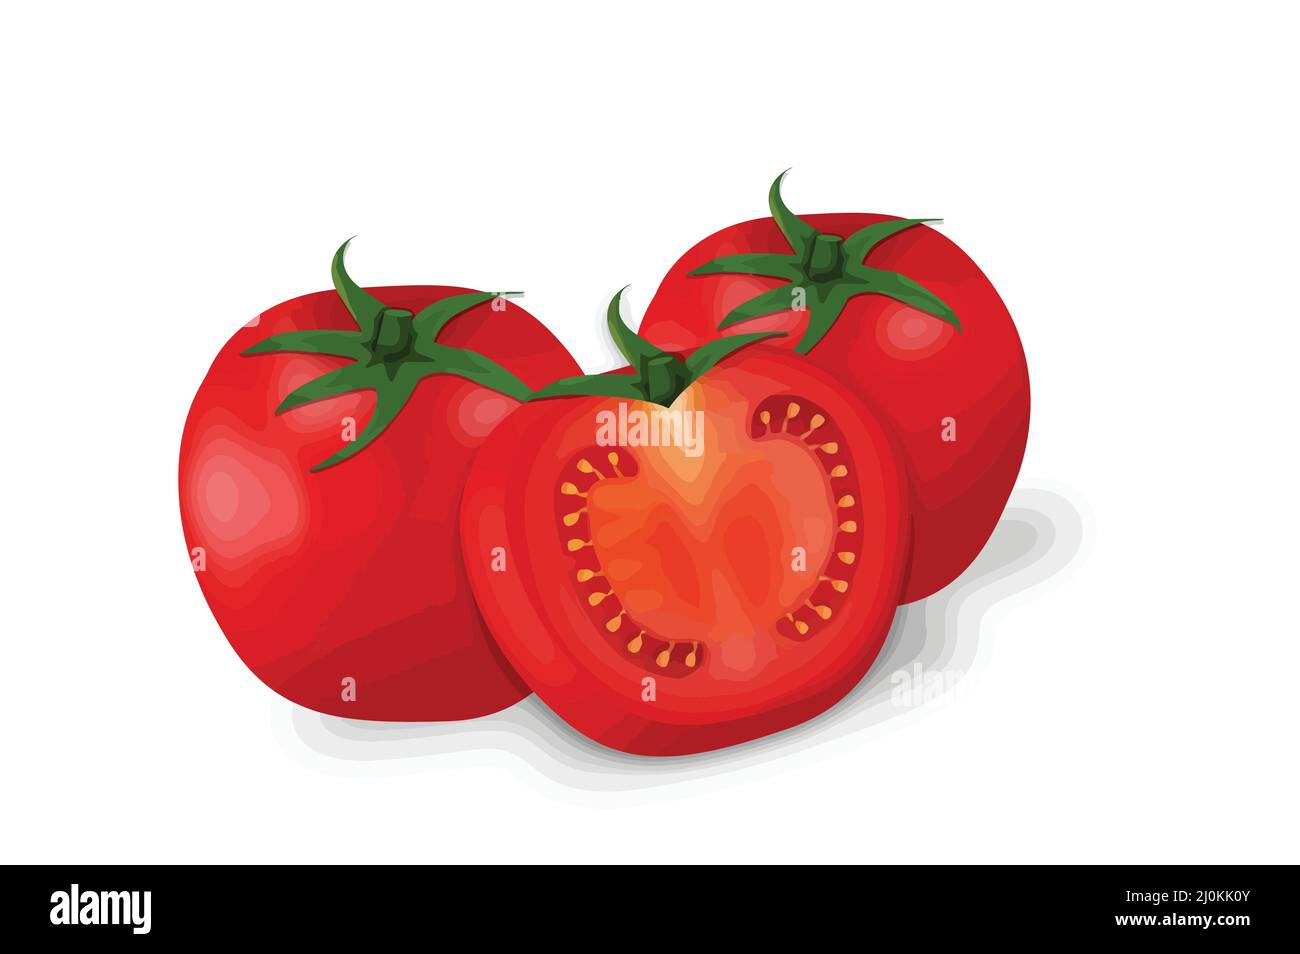 Red fresh tomatoes with green stems isolated on white background, vector illustration Stock Vector